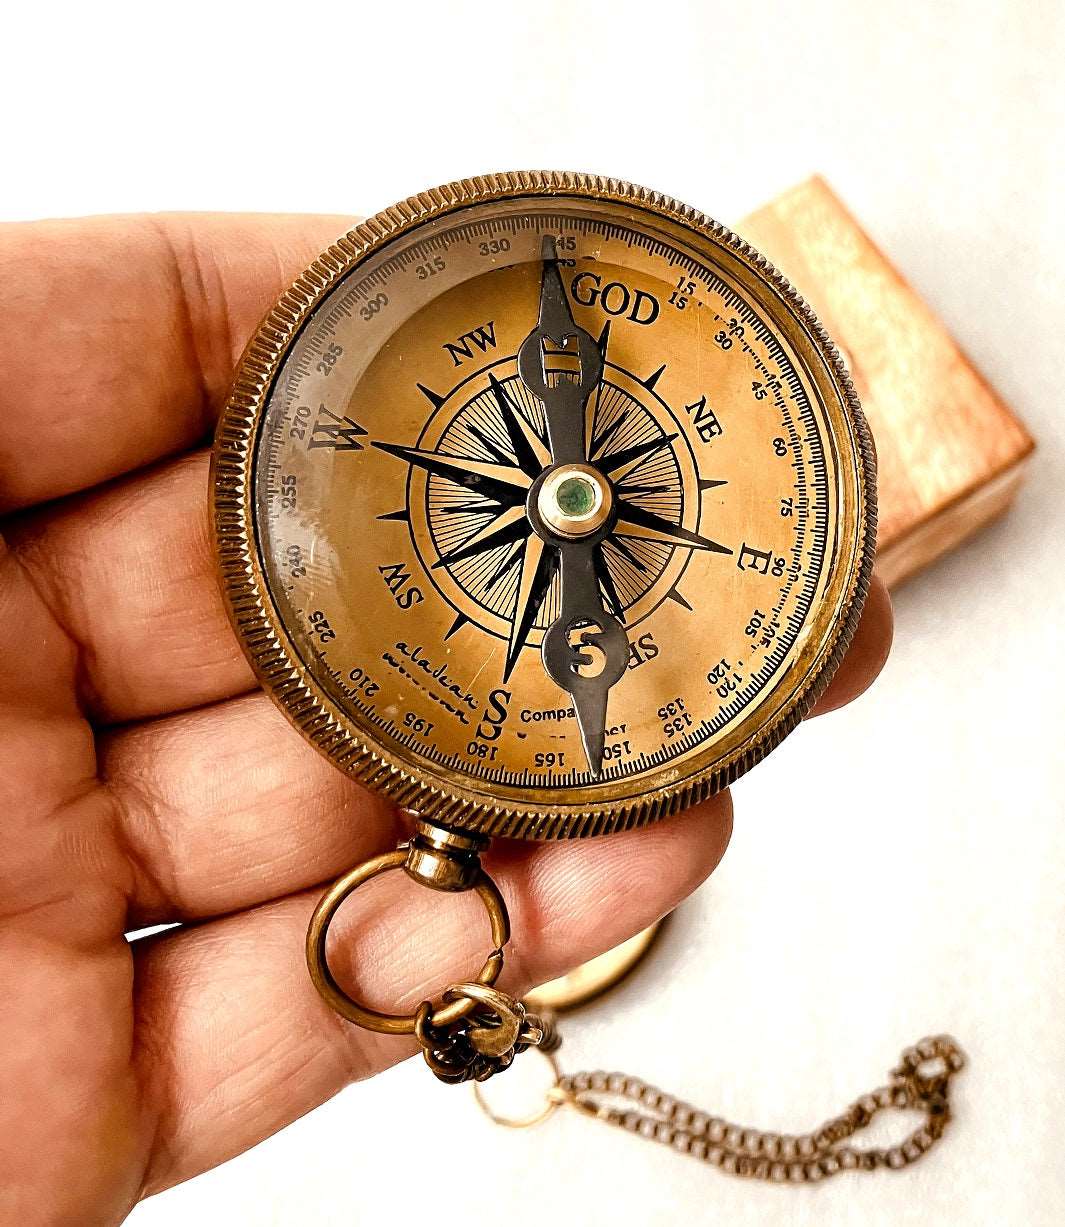 Inspiration gift for son from mom dad - Engraved compass with meaningful quote